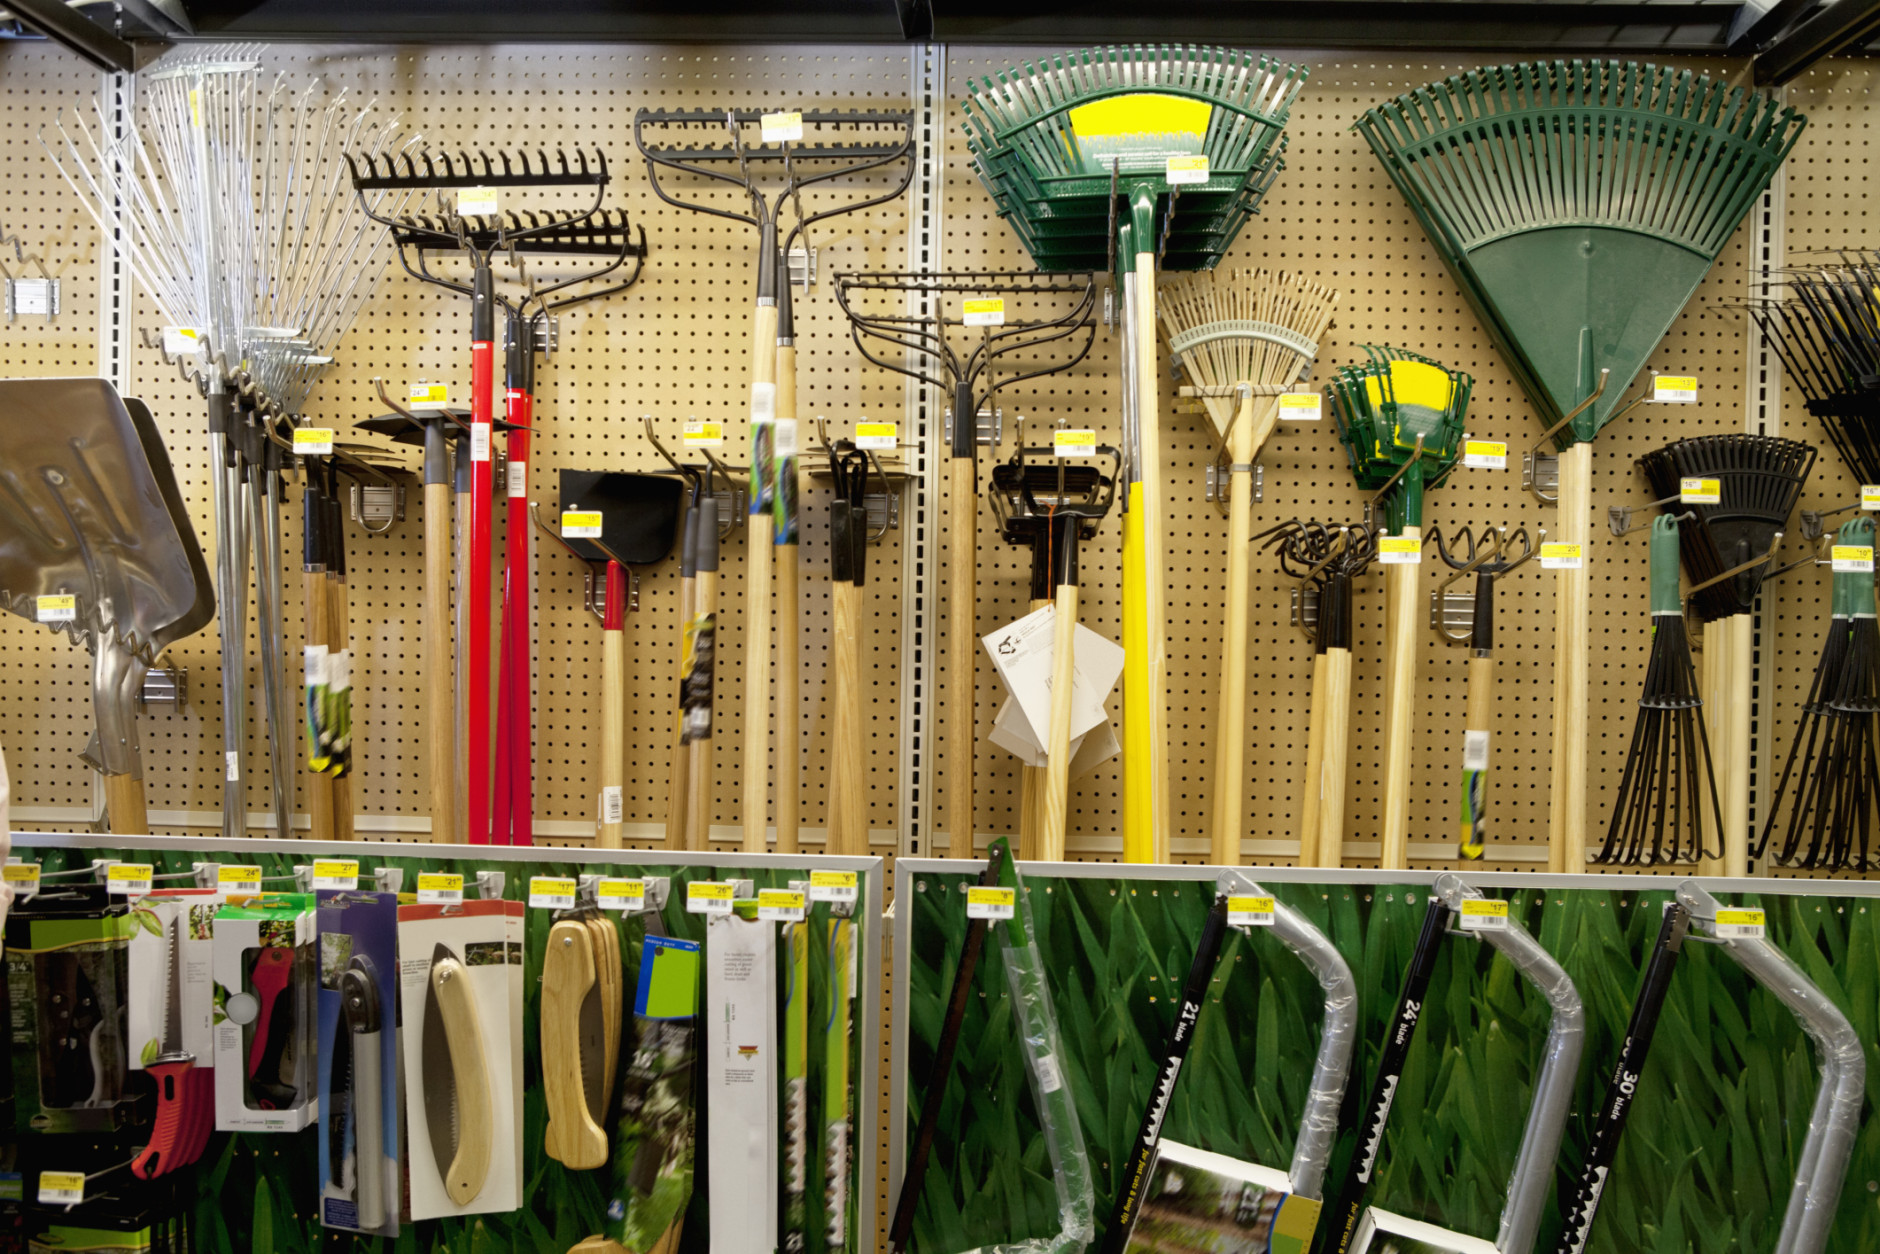 Gardening tools on display in store